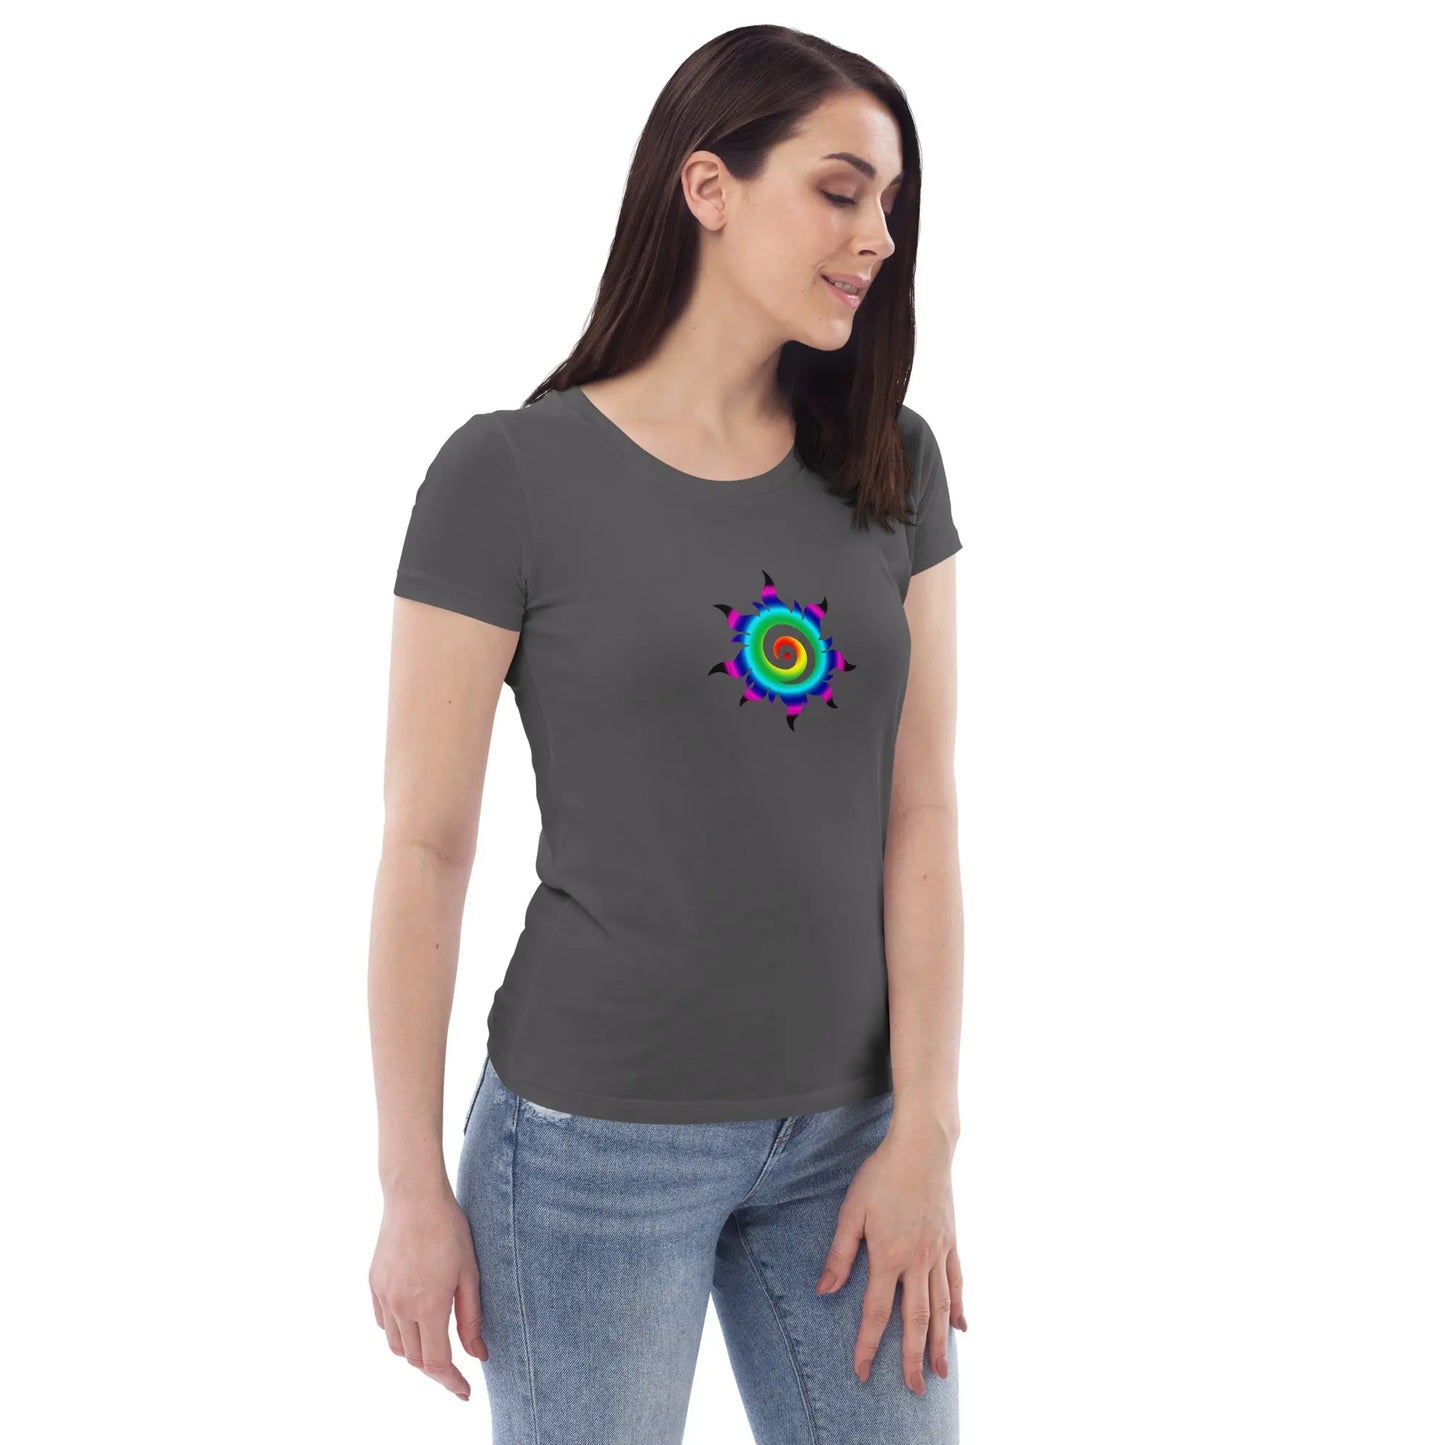 Women's fitted eco tee ActSunx - Image #7